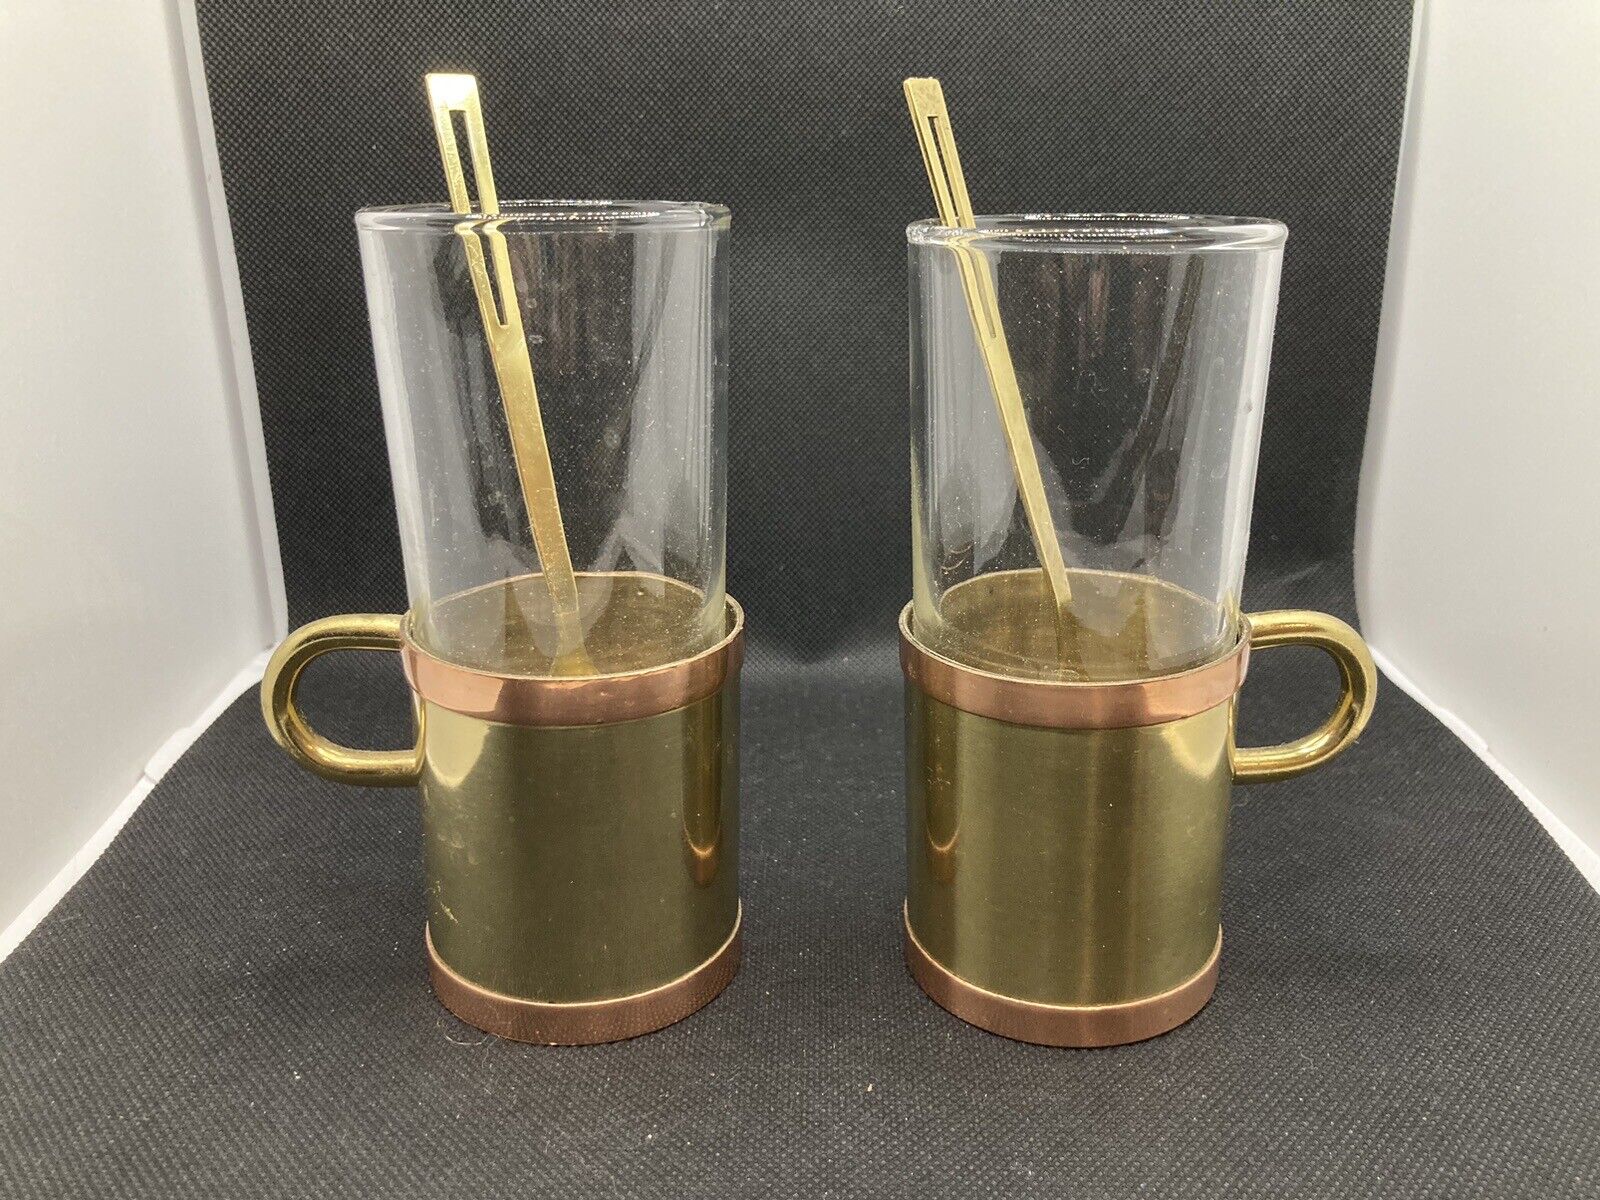 Beucler Vintage 1970 Set Of 2 Solid Copper & Brass European Style Mugs 8oz 